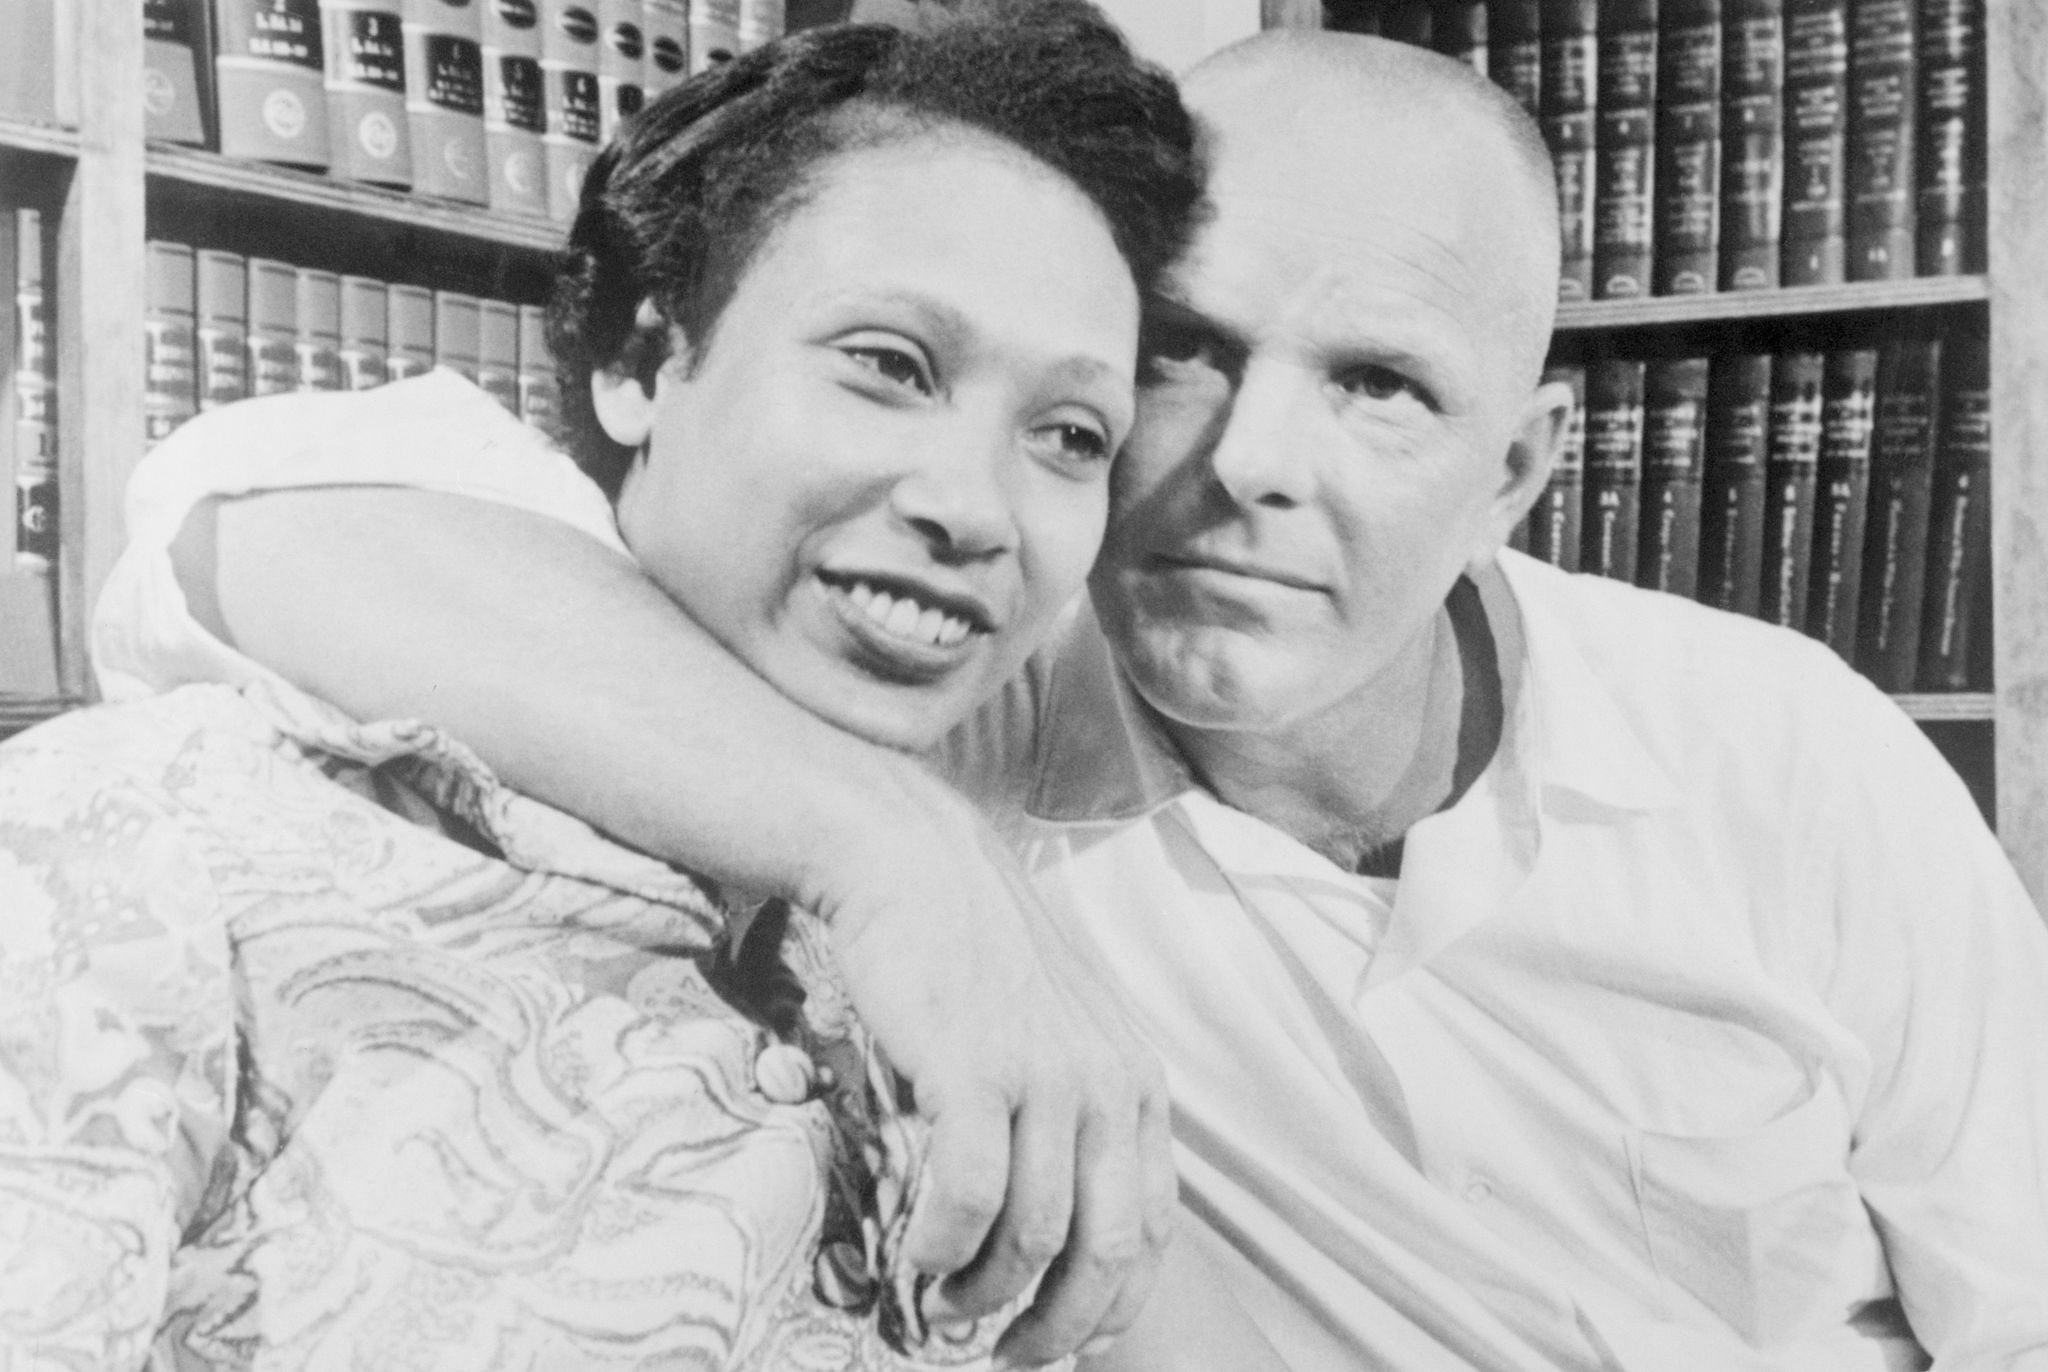 the supreme court ruled unanimously that a virginia law banning marriage between african americans and caucasians was unconstitutional, thus nullifying similar statues in 15 other states the decision came in a case involving richard perry loving, a white construction worker and his african american wife, mildred the couple married in the district of columbia in 1958 and were arrested upon their return to their native caroline county, virginia they were given one year suspended sentences on condition that they stay out of the state for 25 years the lovings decided in 1963 to return home and fight banishment, with the help of the american civil liberties union